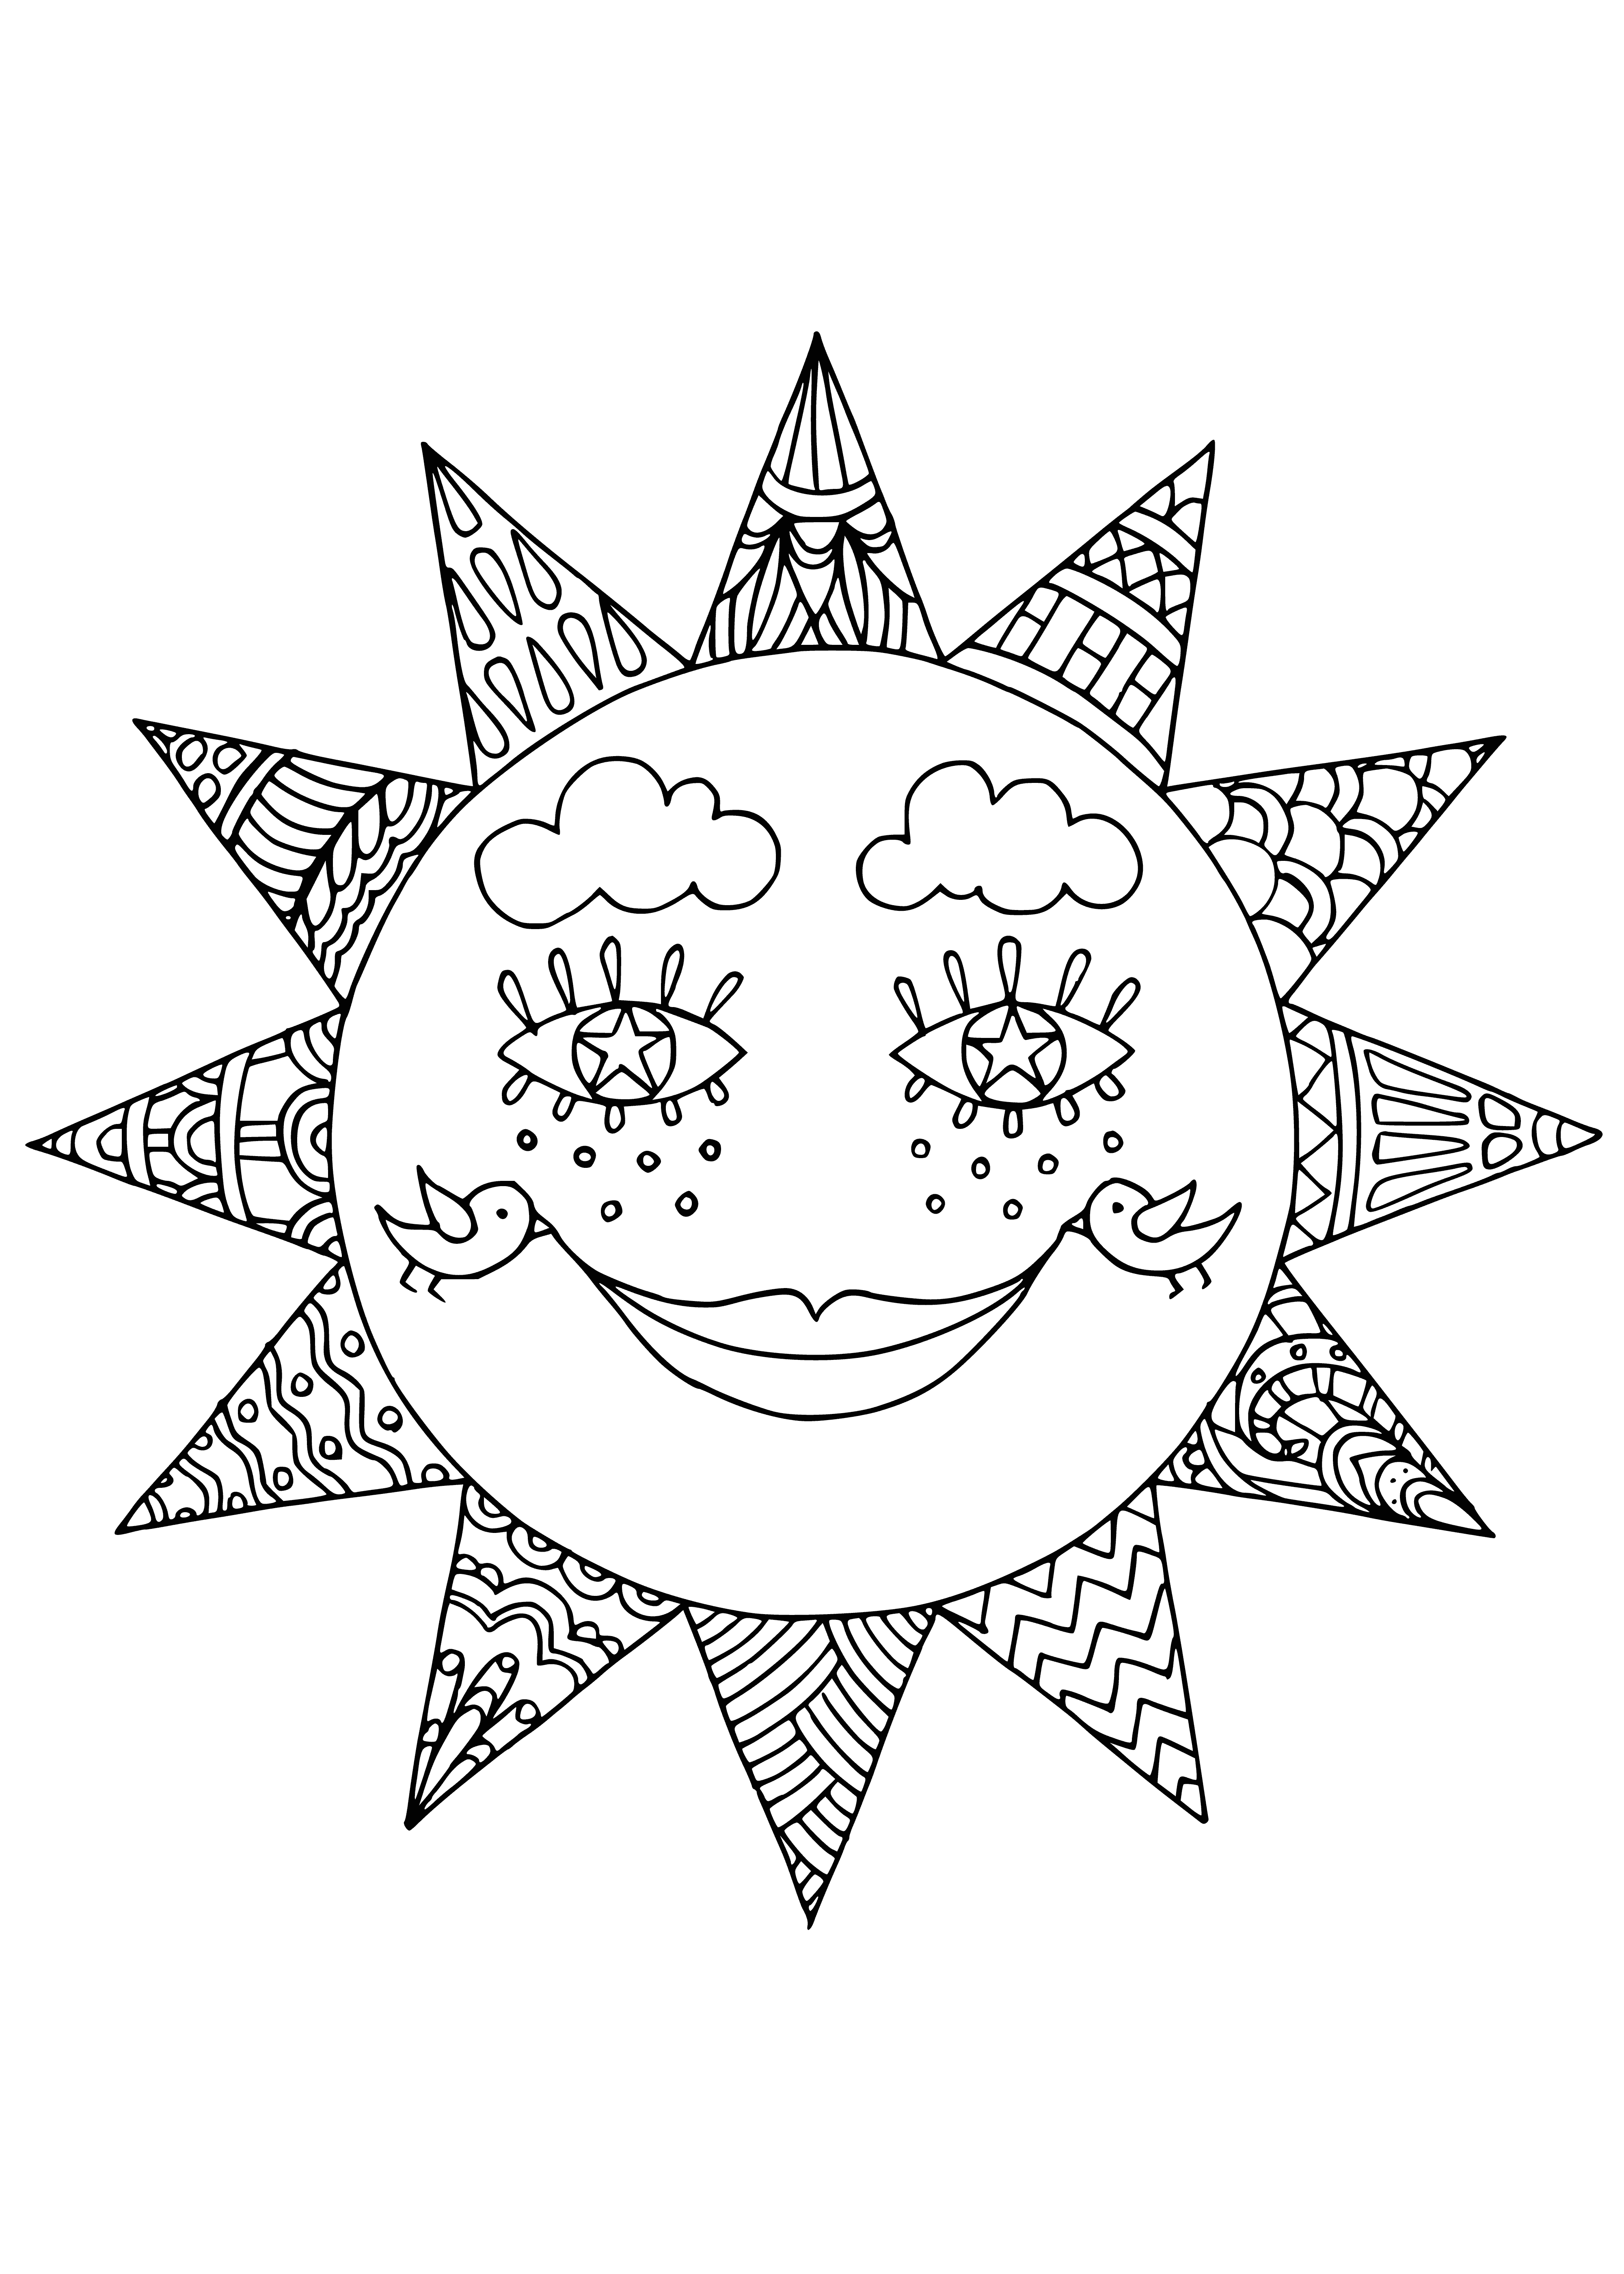 coloring page: A large yellow sun is surrounded by smaller orange suns in a blue sky, with two green trees in the foreground. #ColoringPage #Sun #Trees